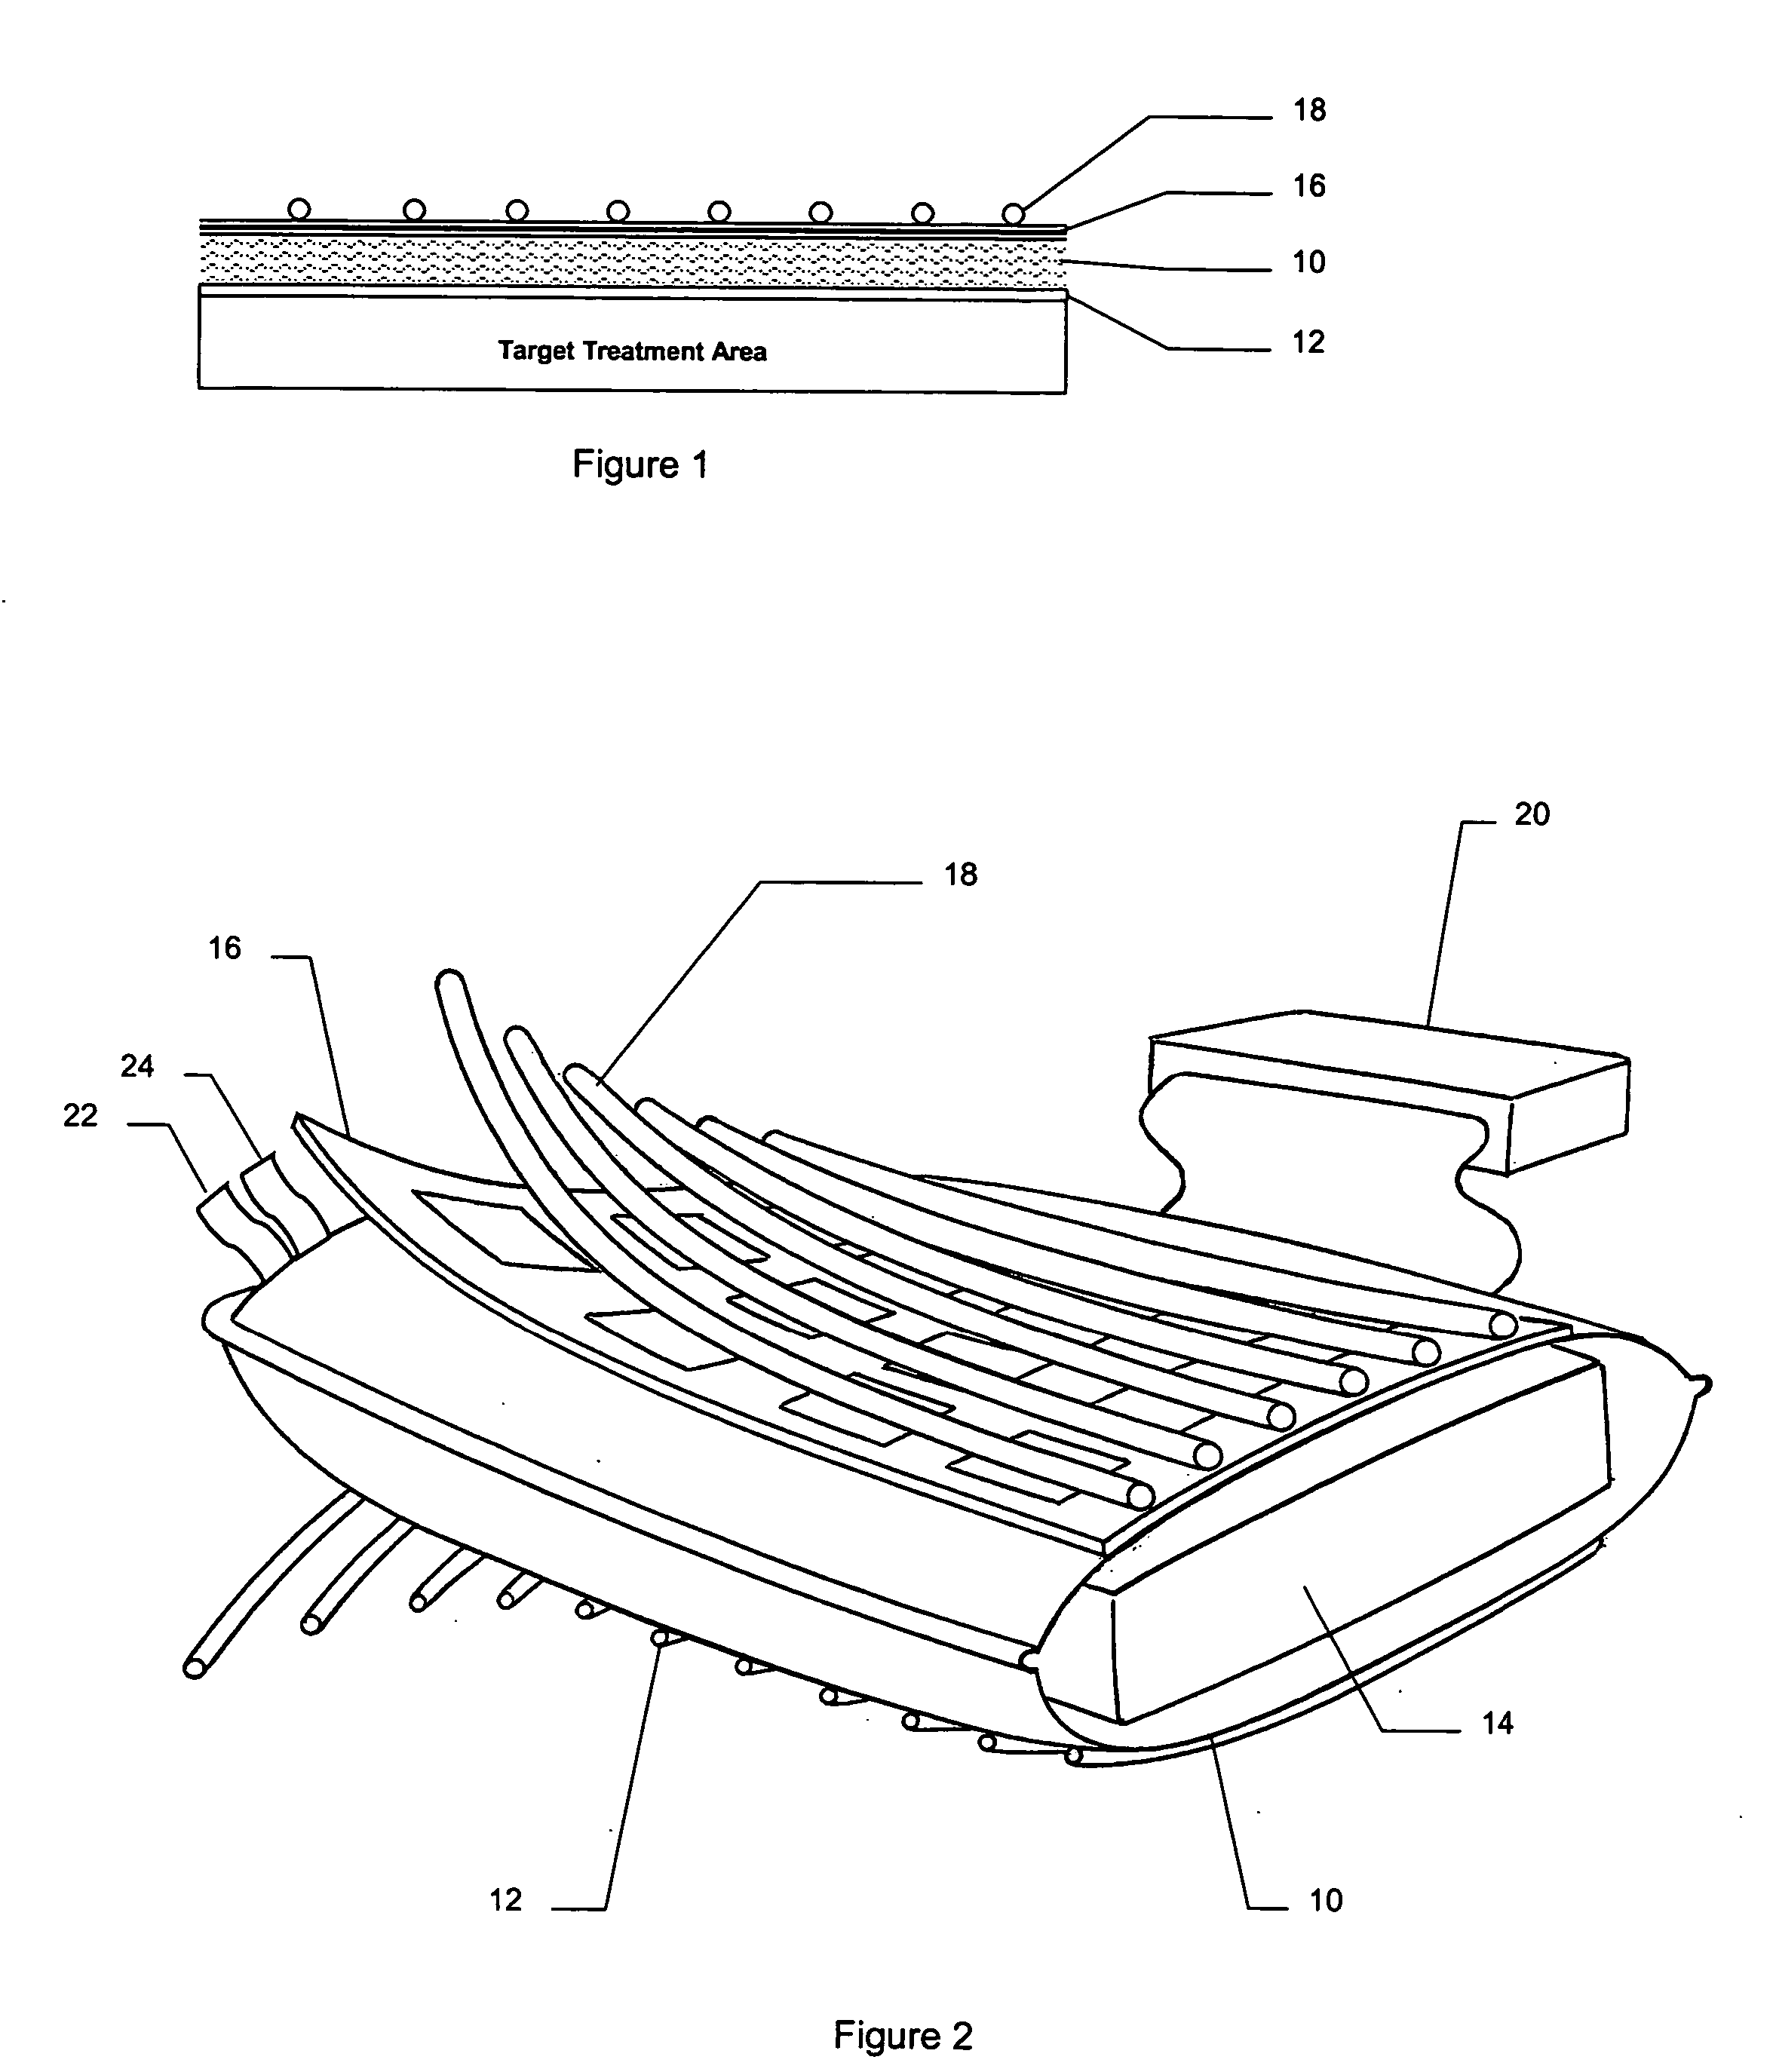 Apparatus for hyperthermia and brachytherapy delivery